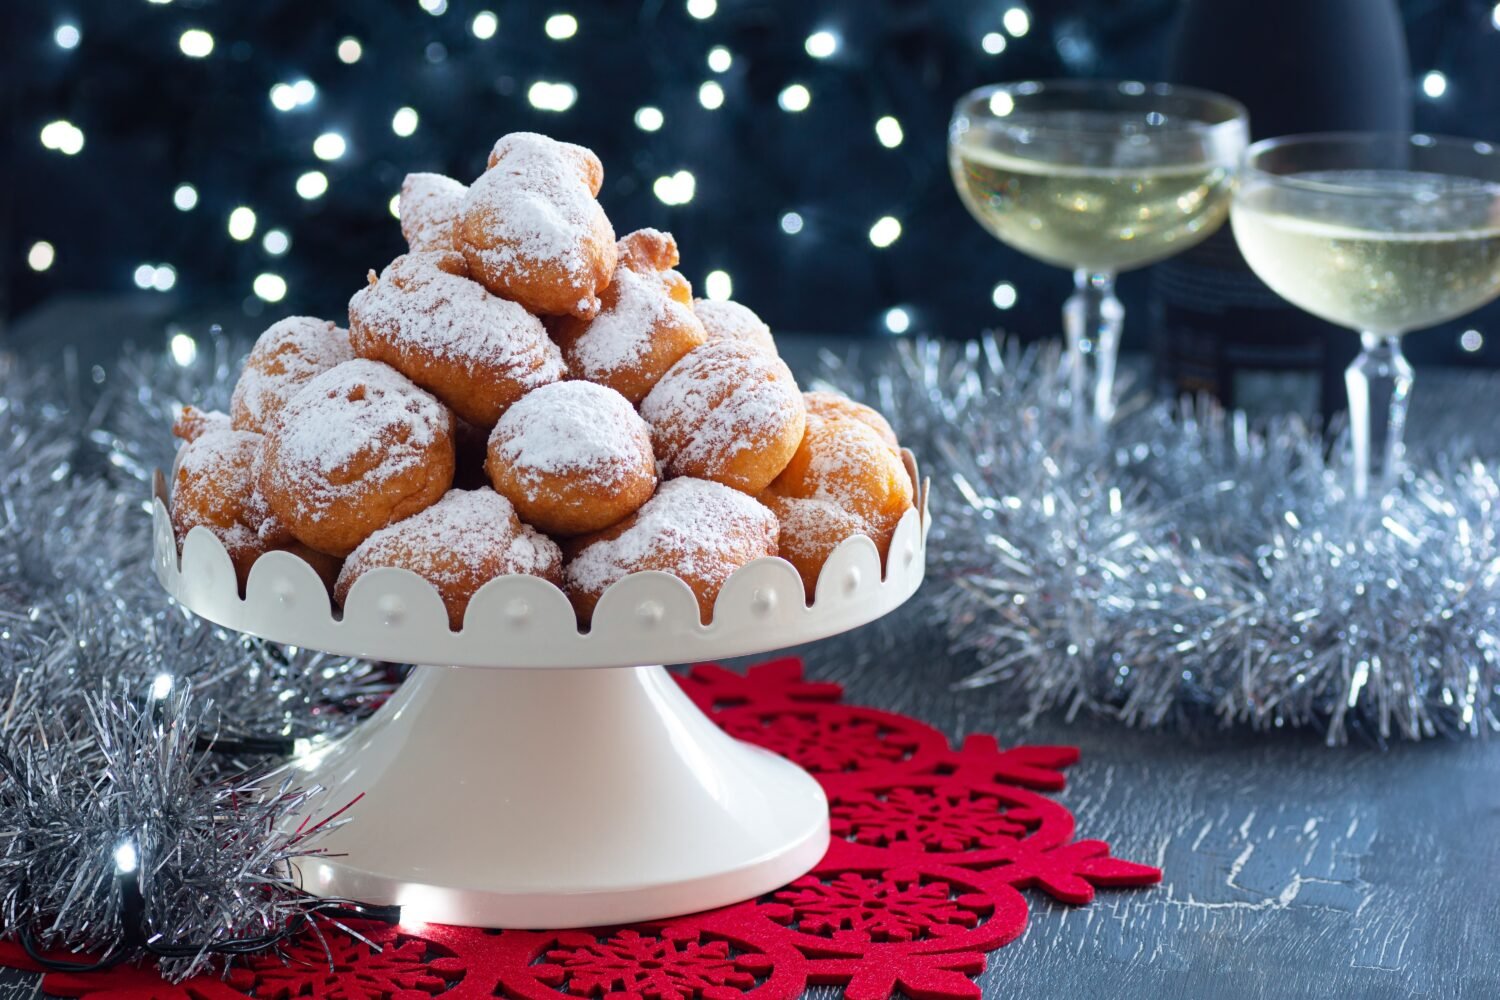 Oliebollen, Smoutballen, or Oil Balls, a Dutch Fried Dough Dumpling Pastry with Powdered Sugar from the Netherlands Served for New Year's Eve